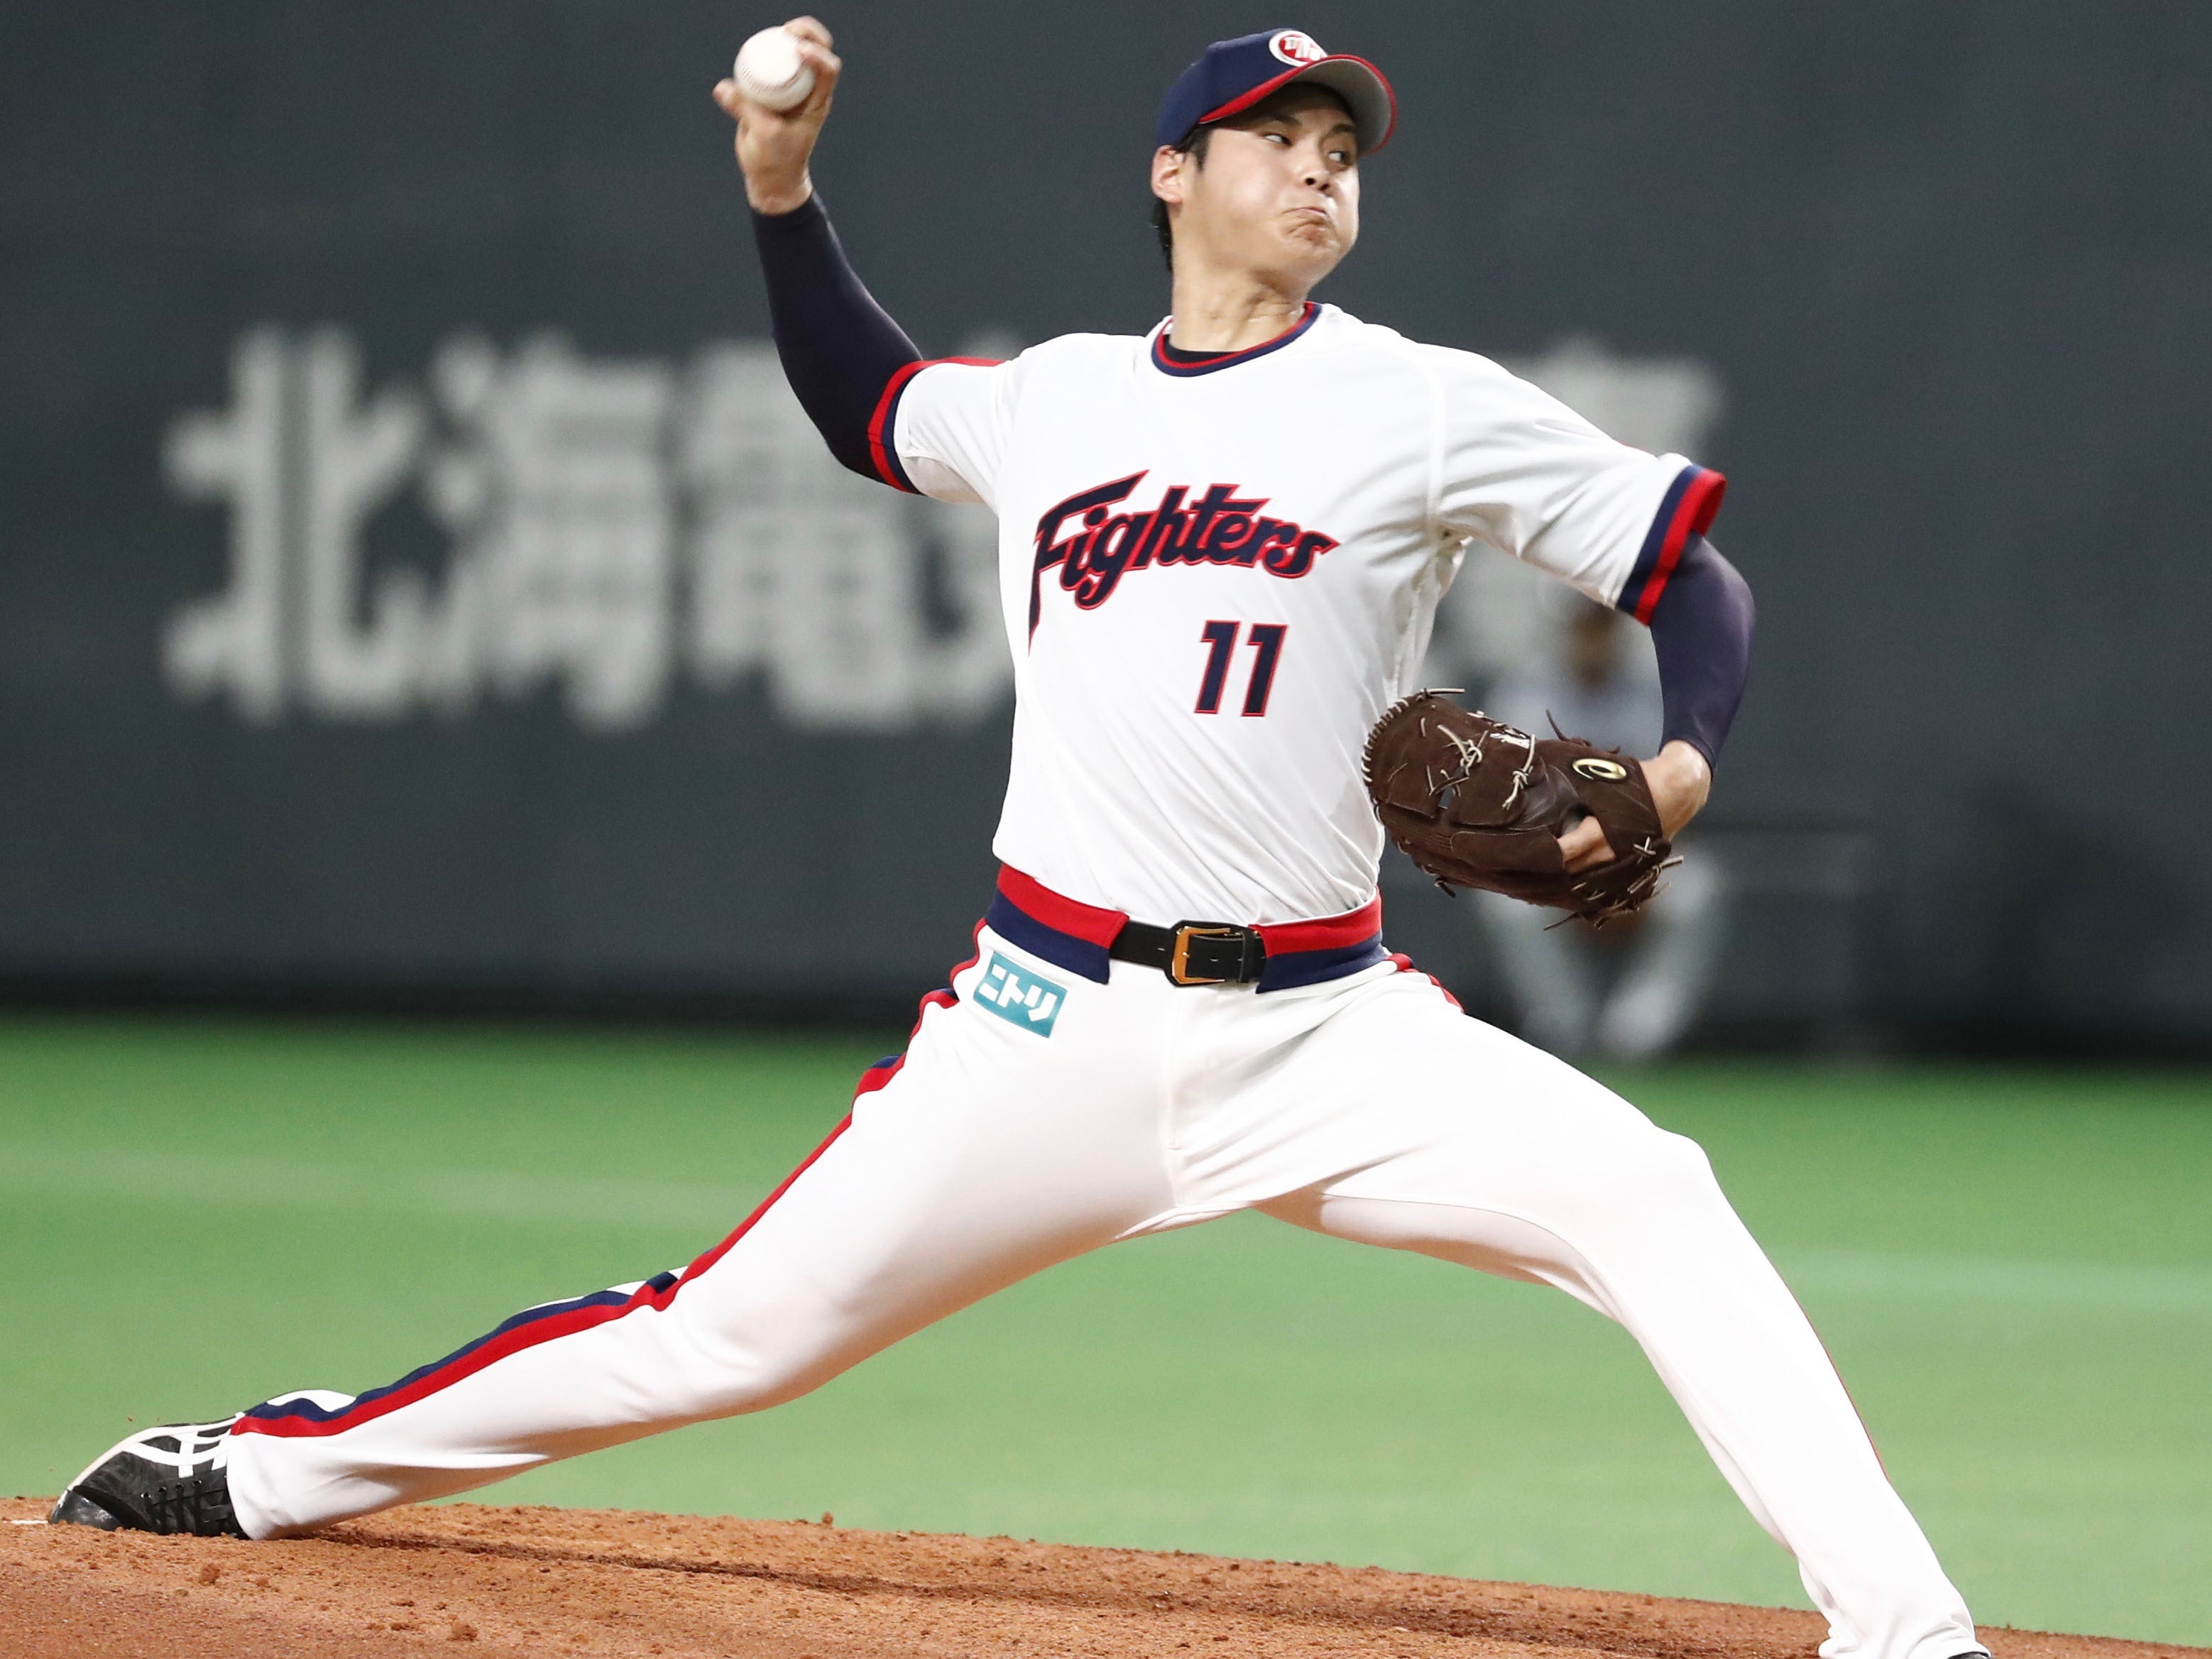 Shohei Ohtani is Japan's Babe Ruth. His next stop is the big leagues ...